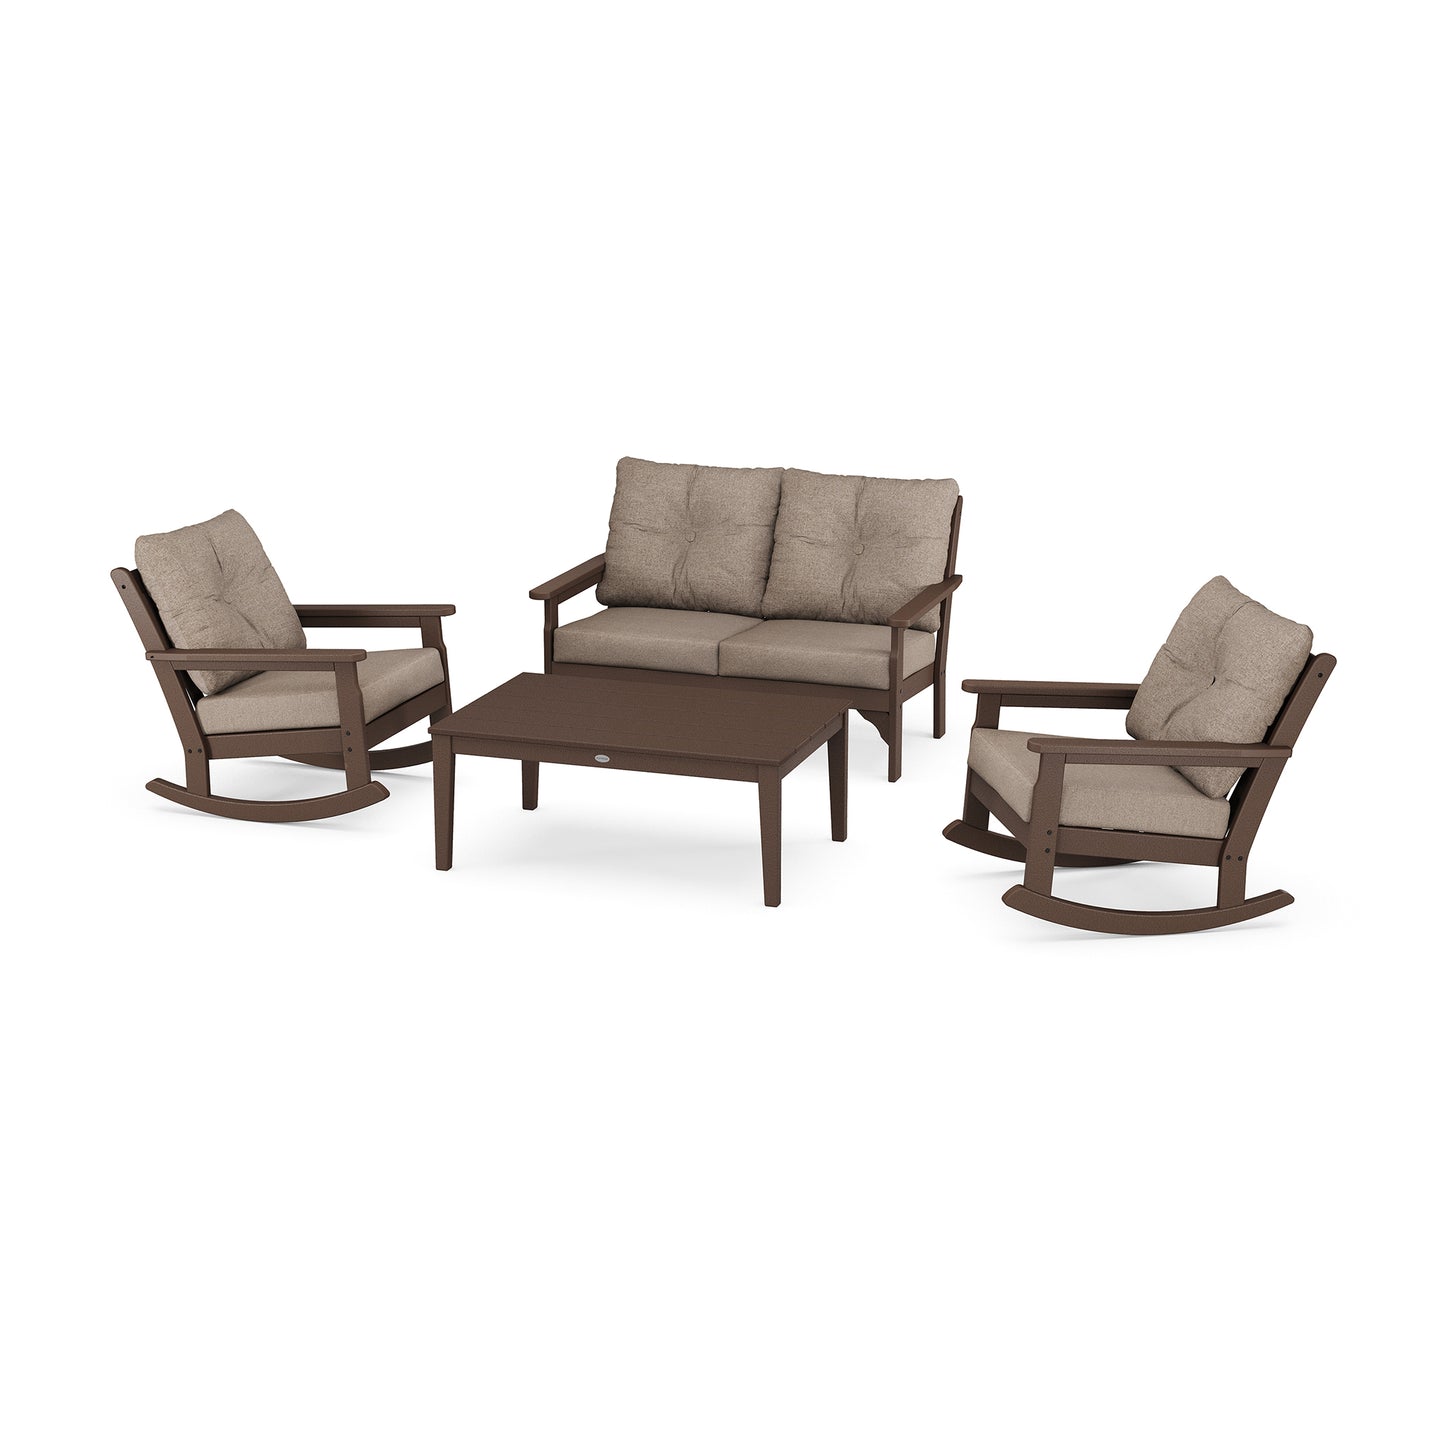 A POLYWOOD Vineyard Deep Seating Set consisting of two rocking chairs, a loveseat, and a coffee table, all made of brown synthetic material with light brown cushions.